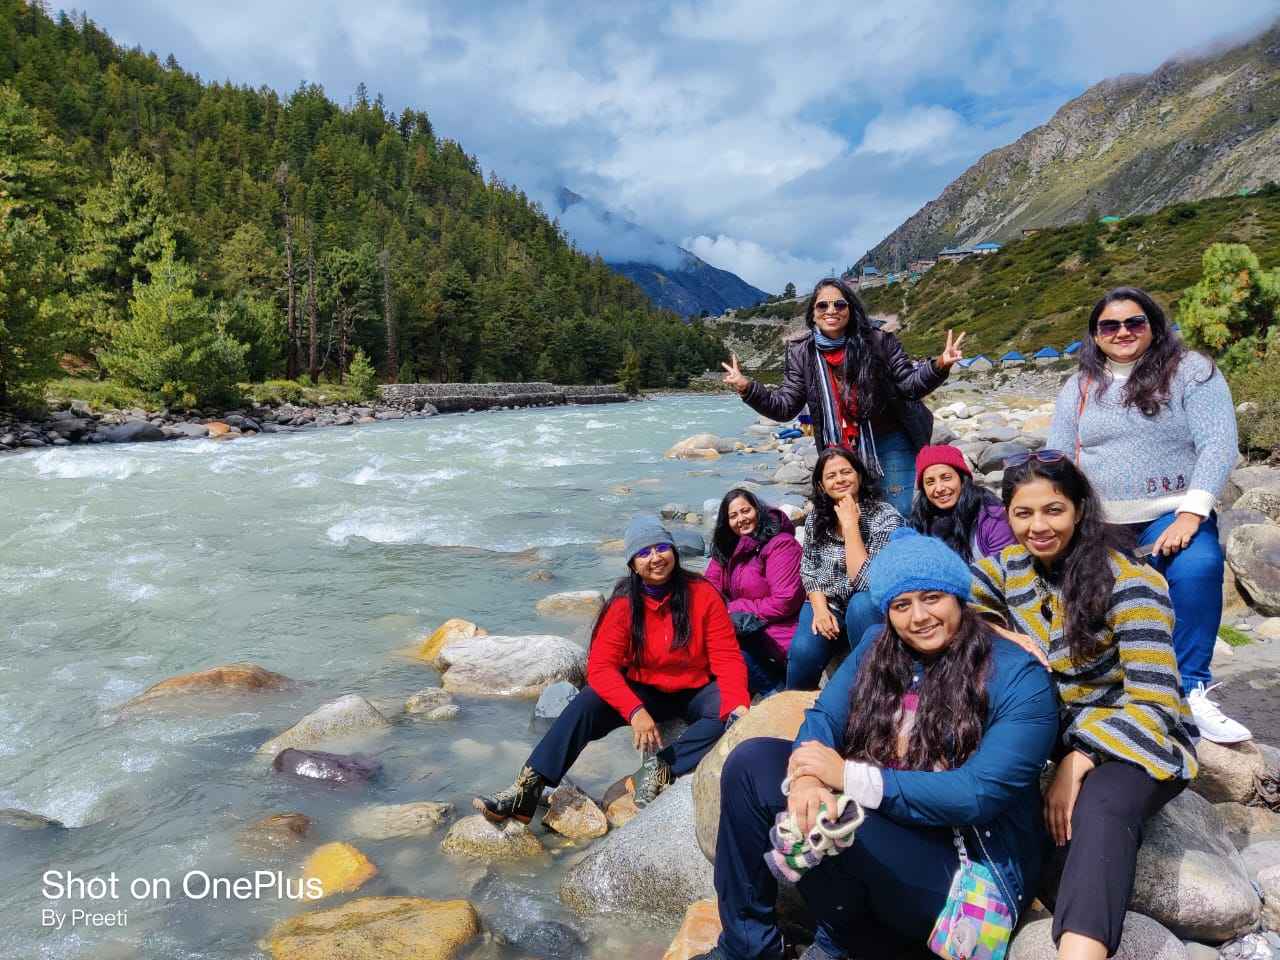 Womaniya on Roadtrips is a travel initiative by women to give them confidence to travel solo